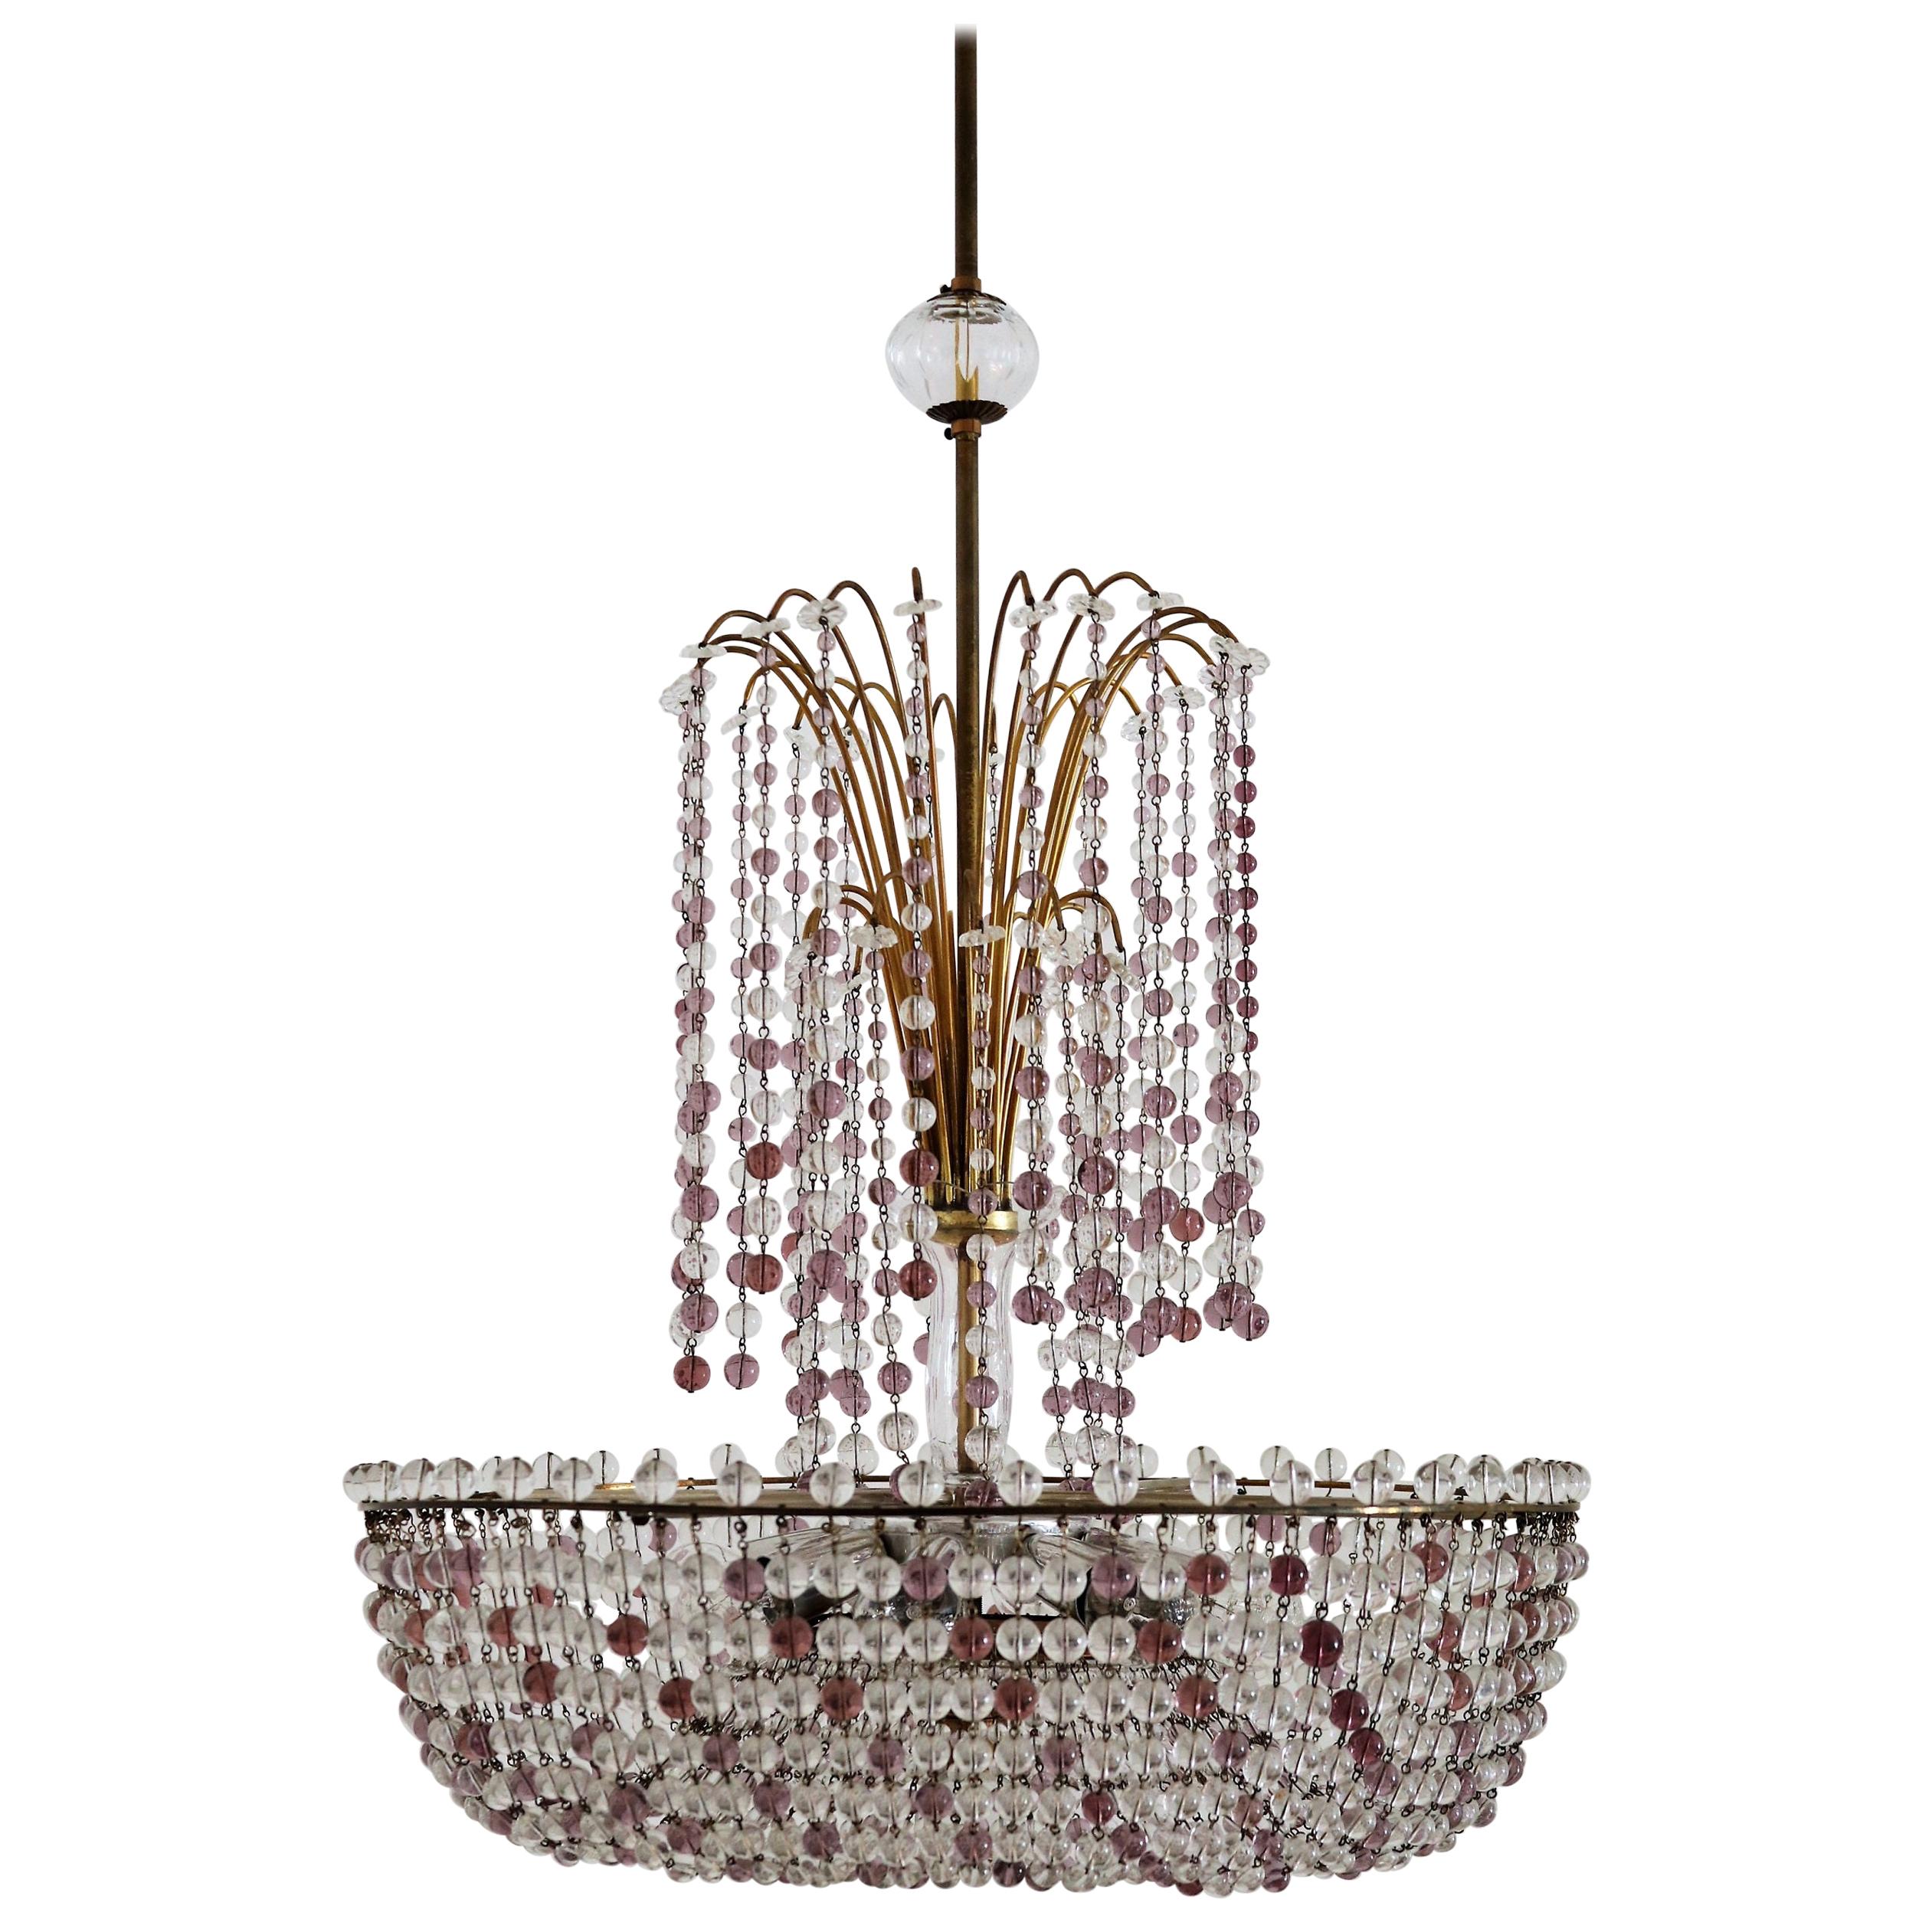 Italian Art Nouveau Handcrafted Murano Waterfall Chandelier in Crystal and Brass For Sale